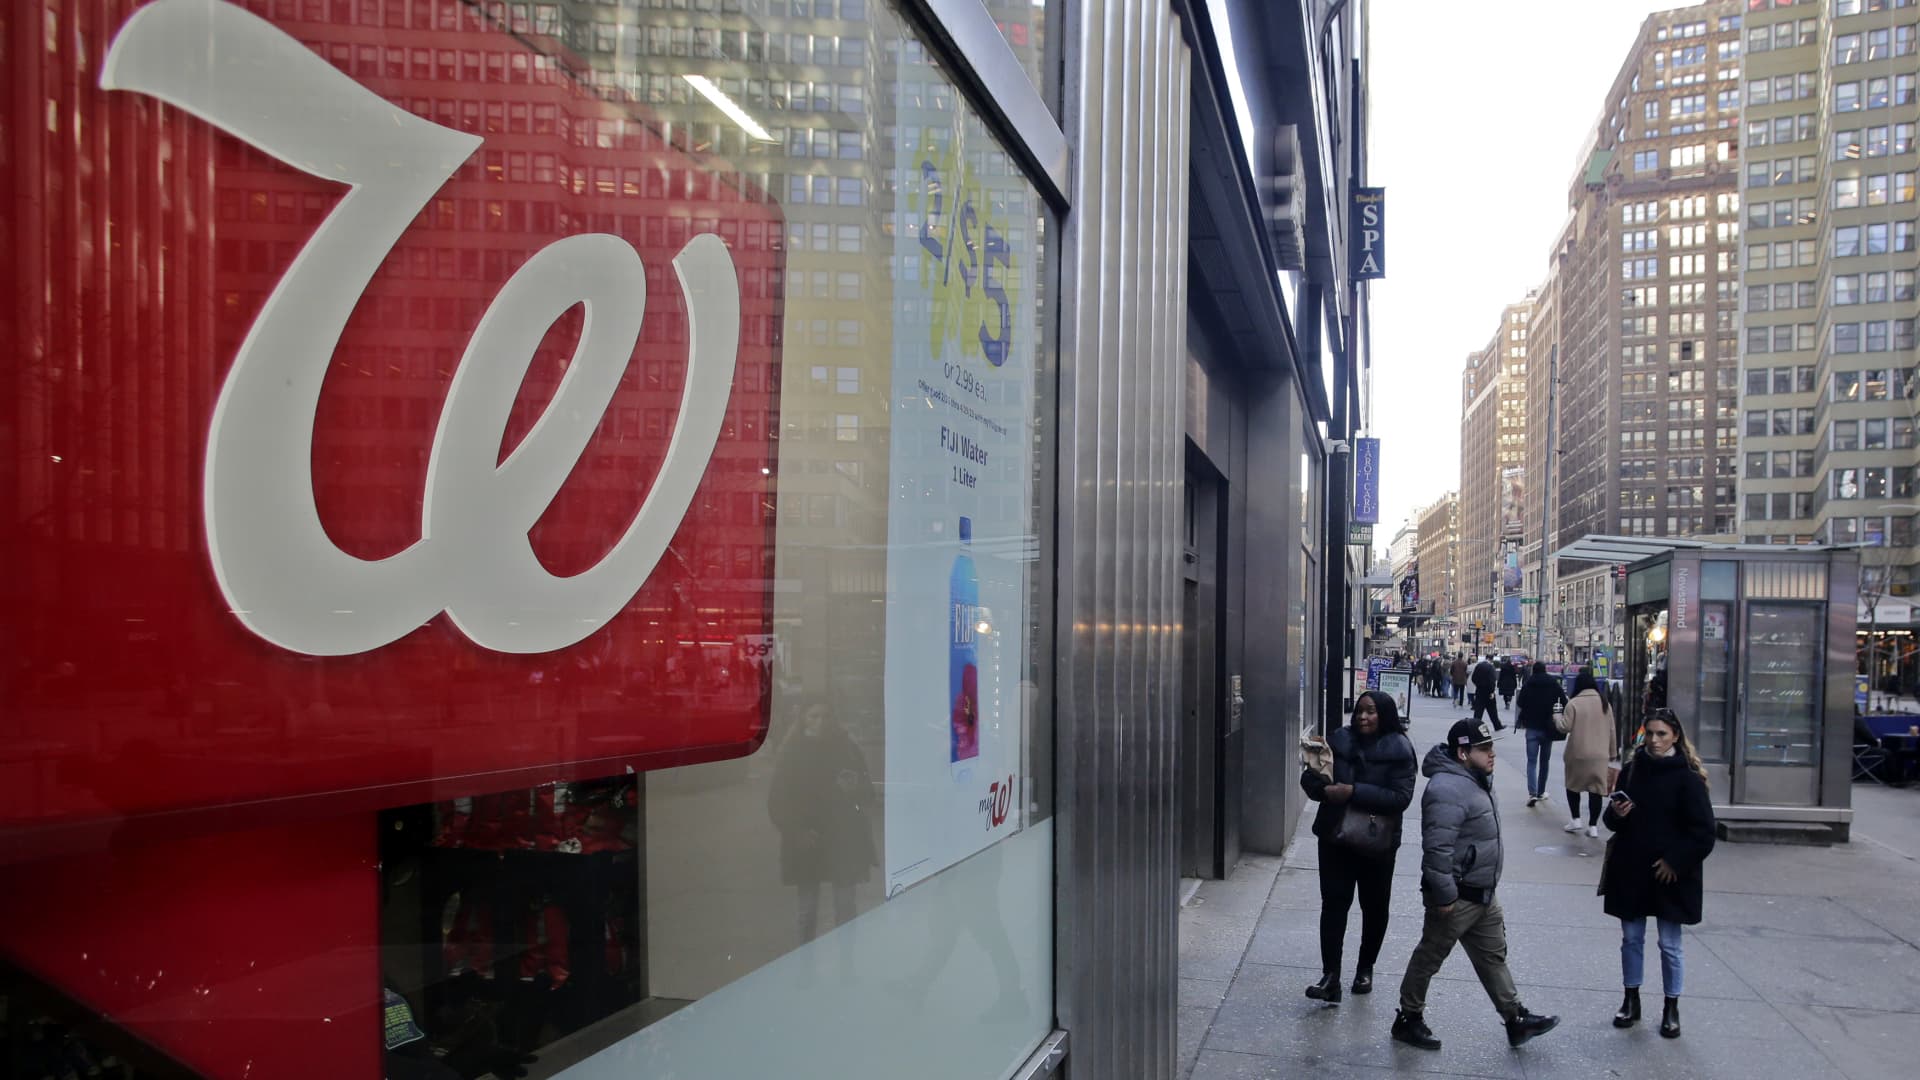 Walgreens slashes earnings guidance due to lower consumer spending, drop in Covid care demand